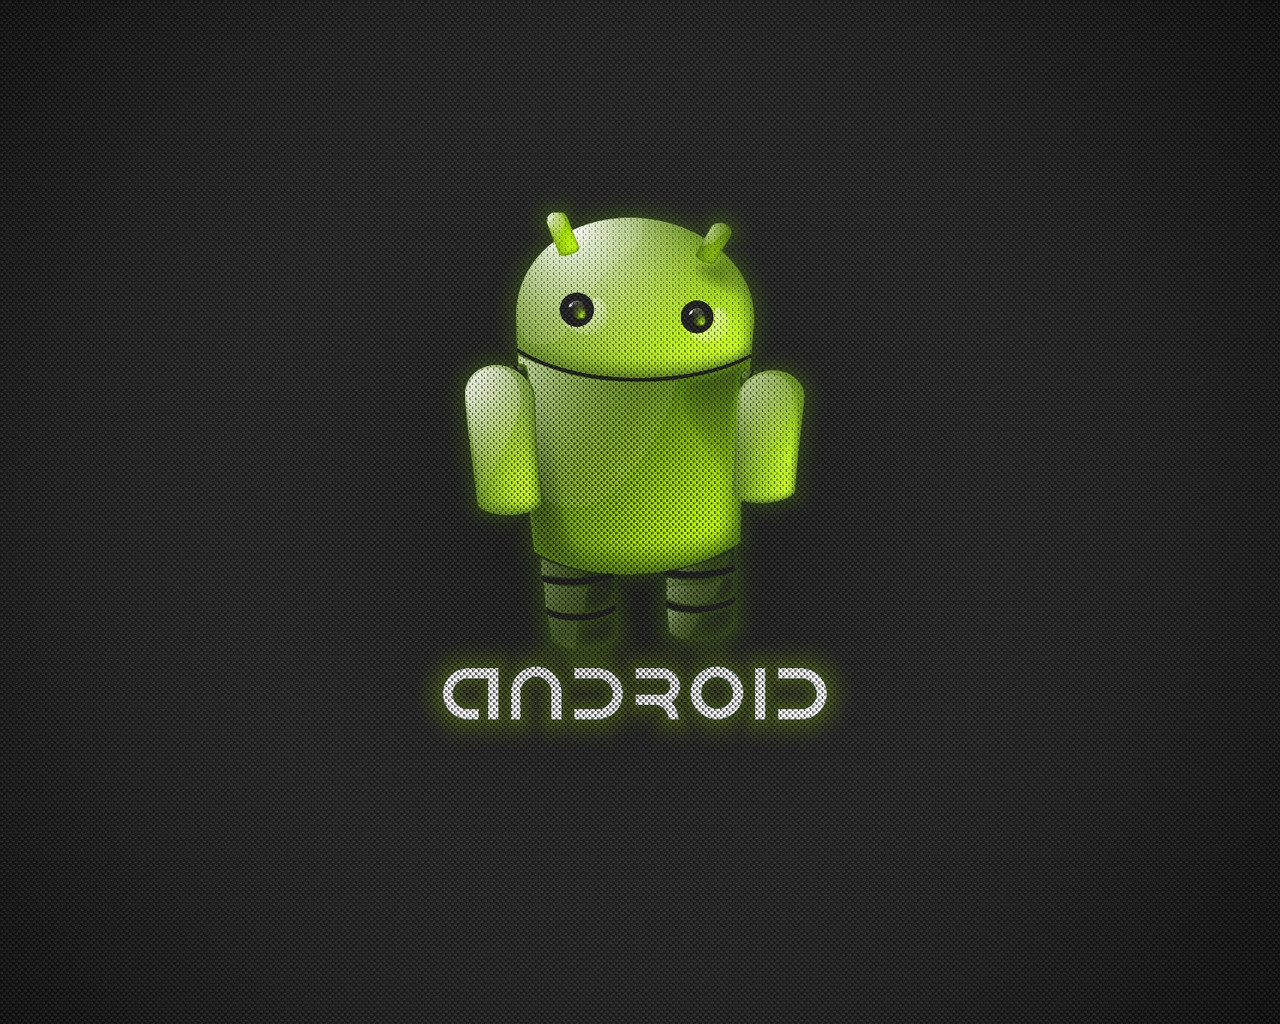 Green Android for 1280 x 1024 resolution